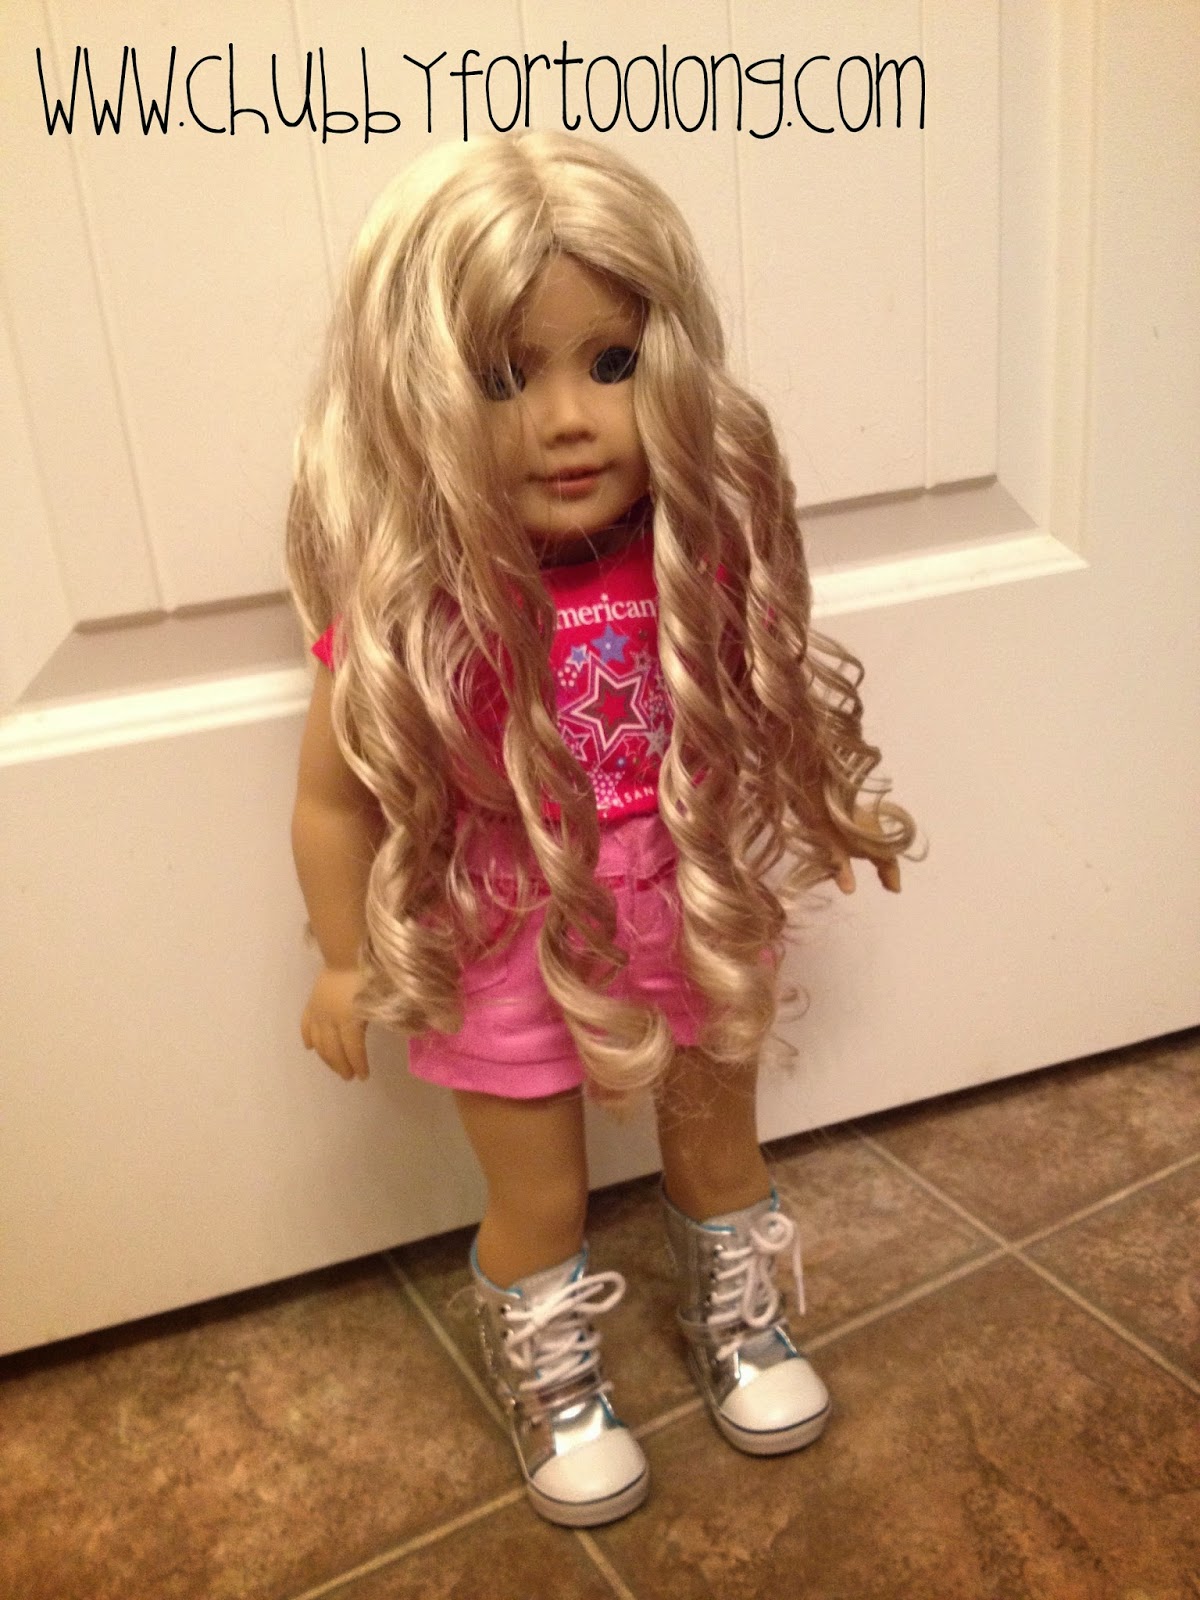 How To Fix Curly American Girl Doll Hair Chubby For Too Long